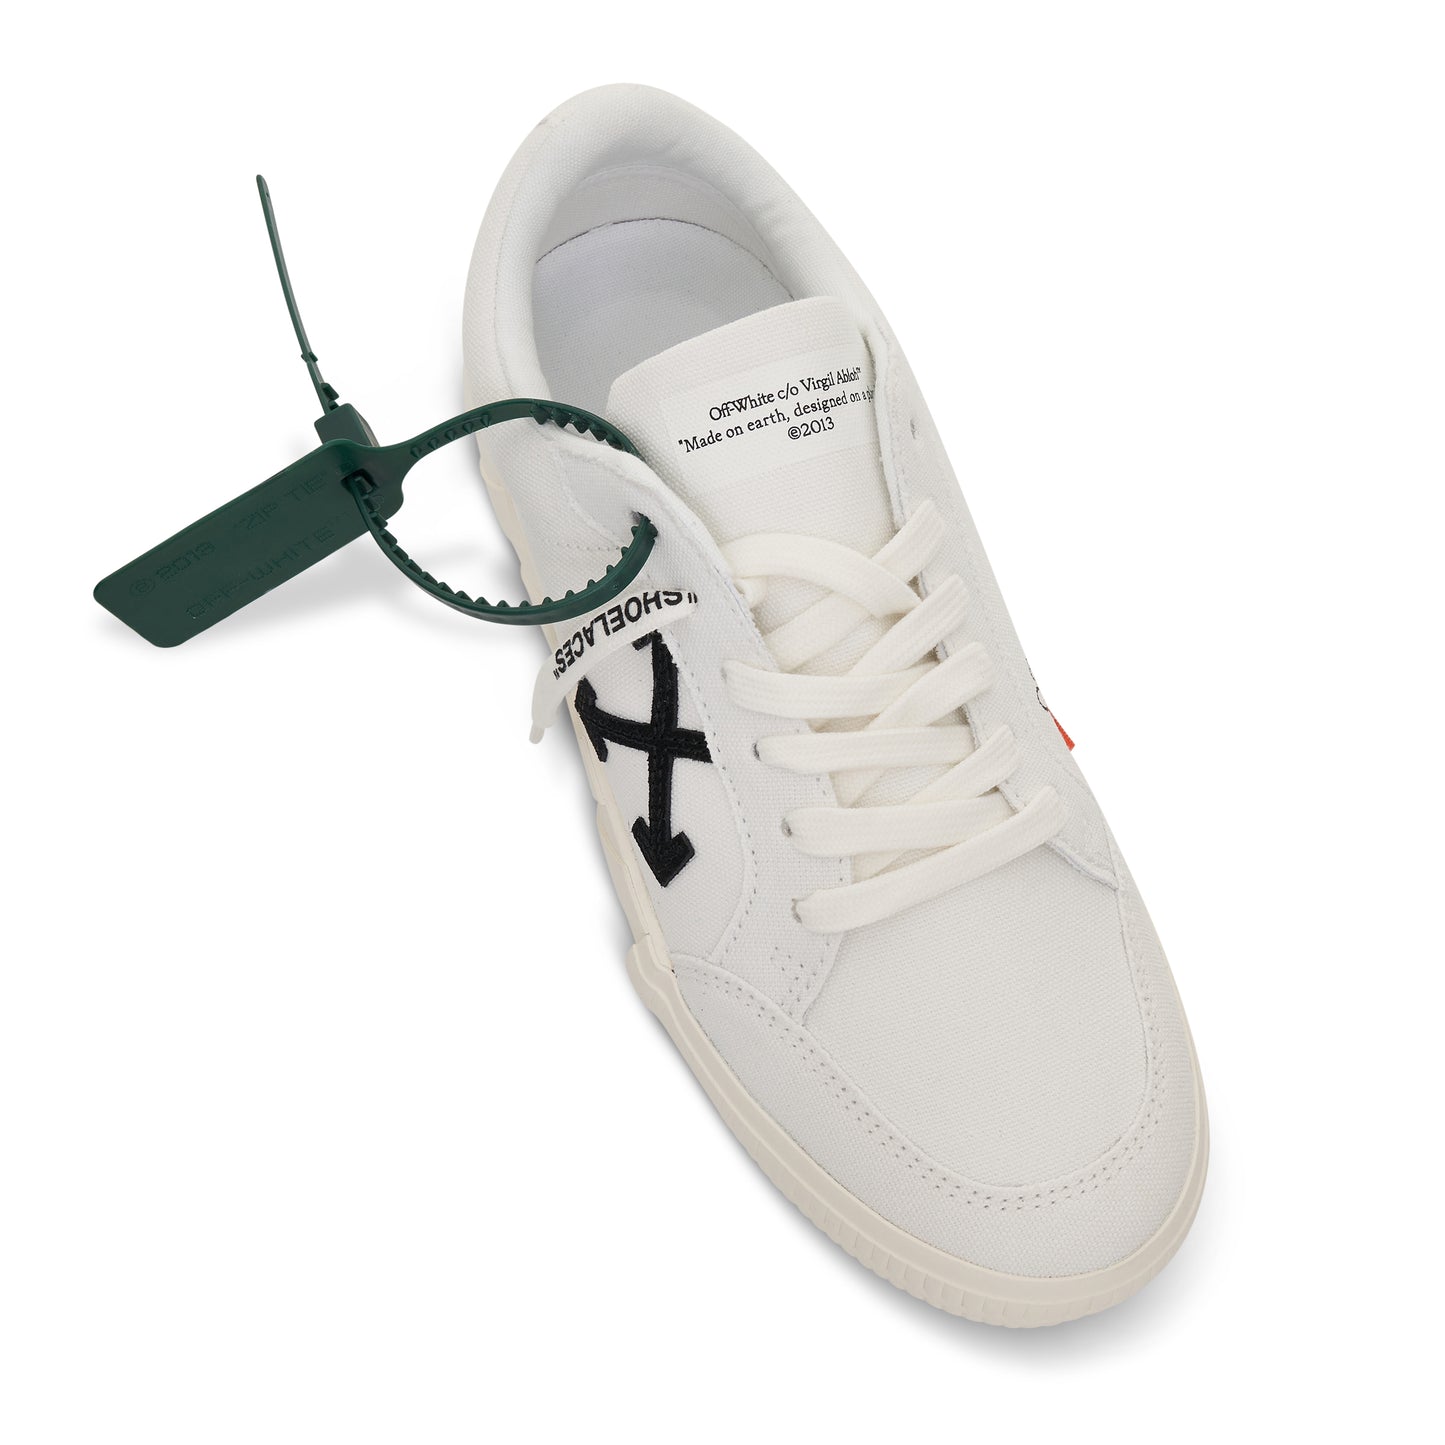 Low Vulcanized Canvas Sneakers in White & Black Colour